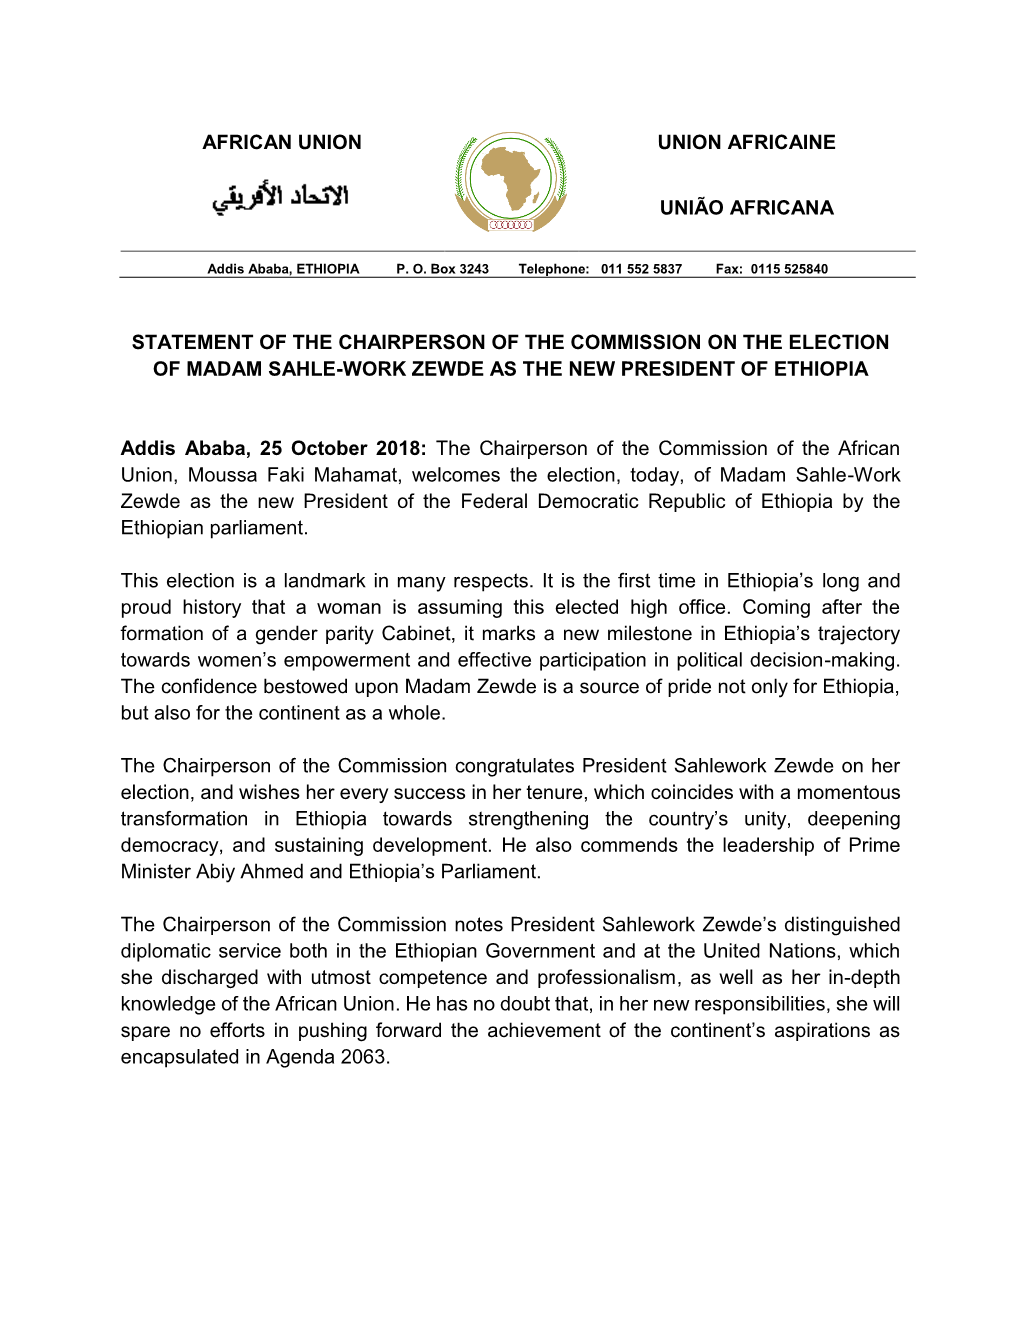 Statement of the Chairperson of the Commission on the Election of Madam Sahle-Work Zewde As the New President of Ethiopia